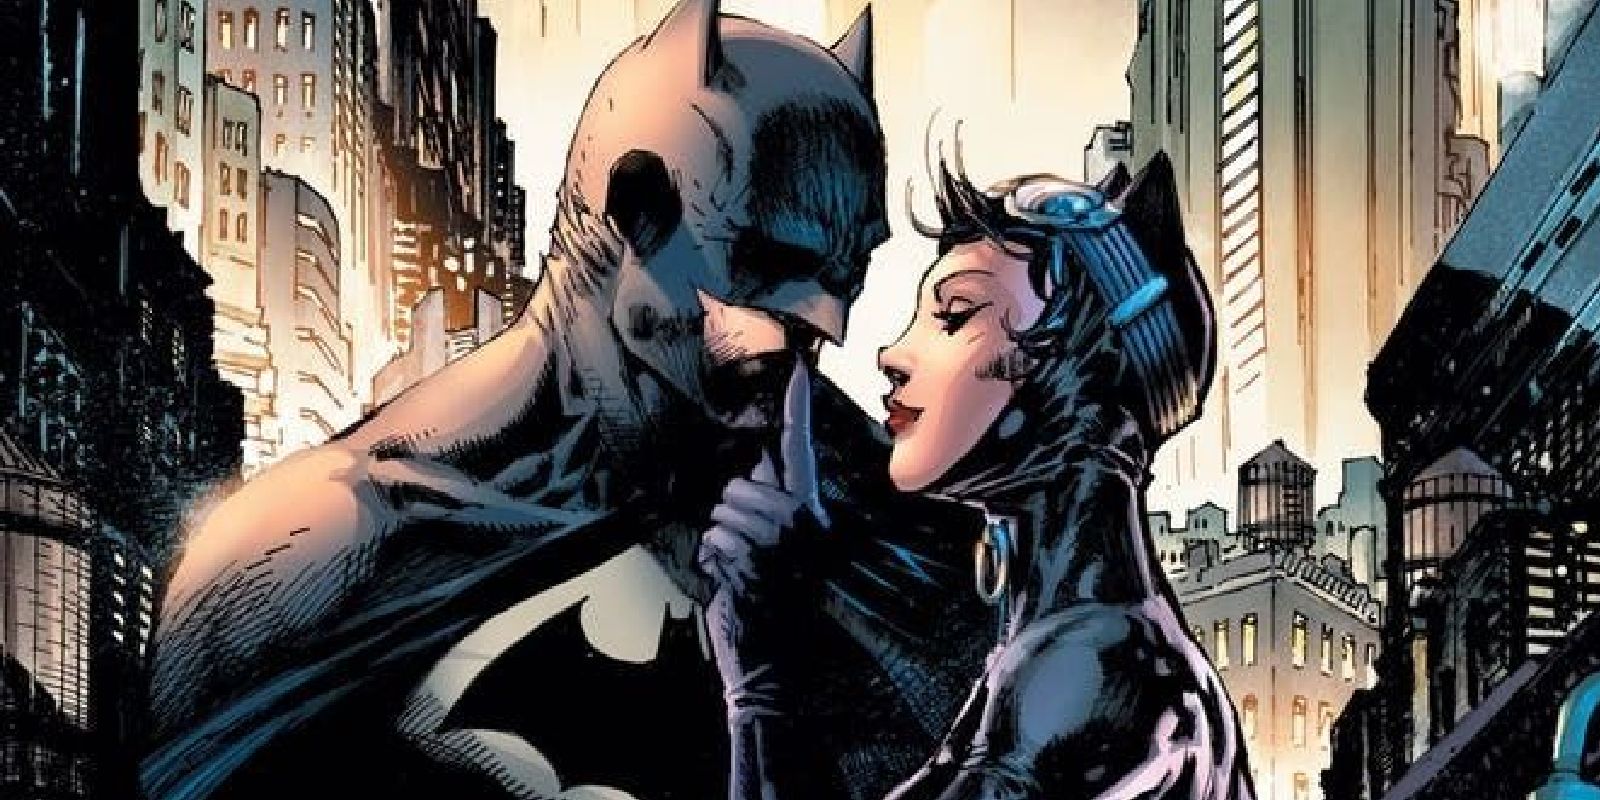 Hush expanded on Batman and Catwoman's relationship.